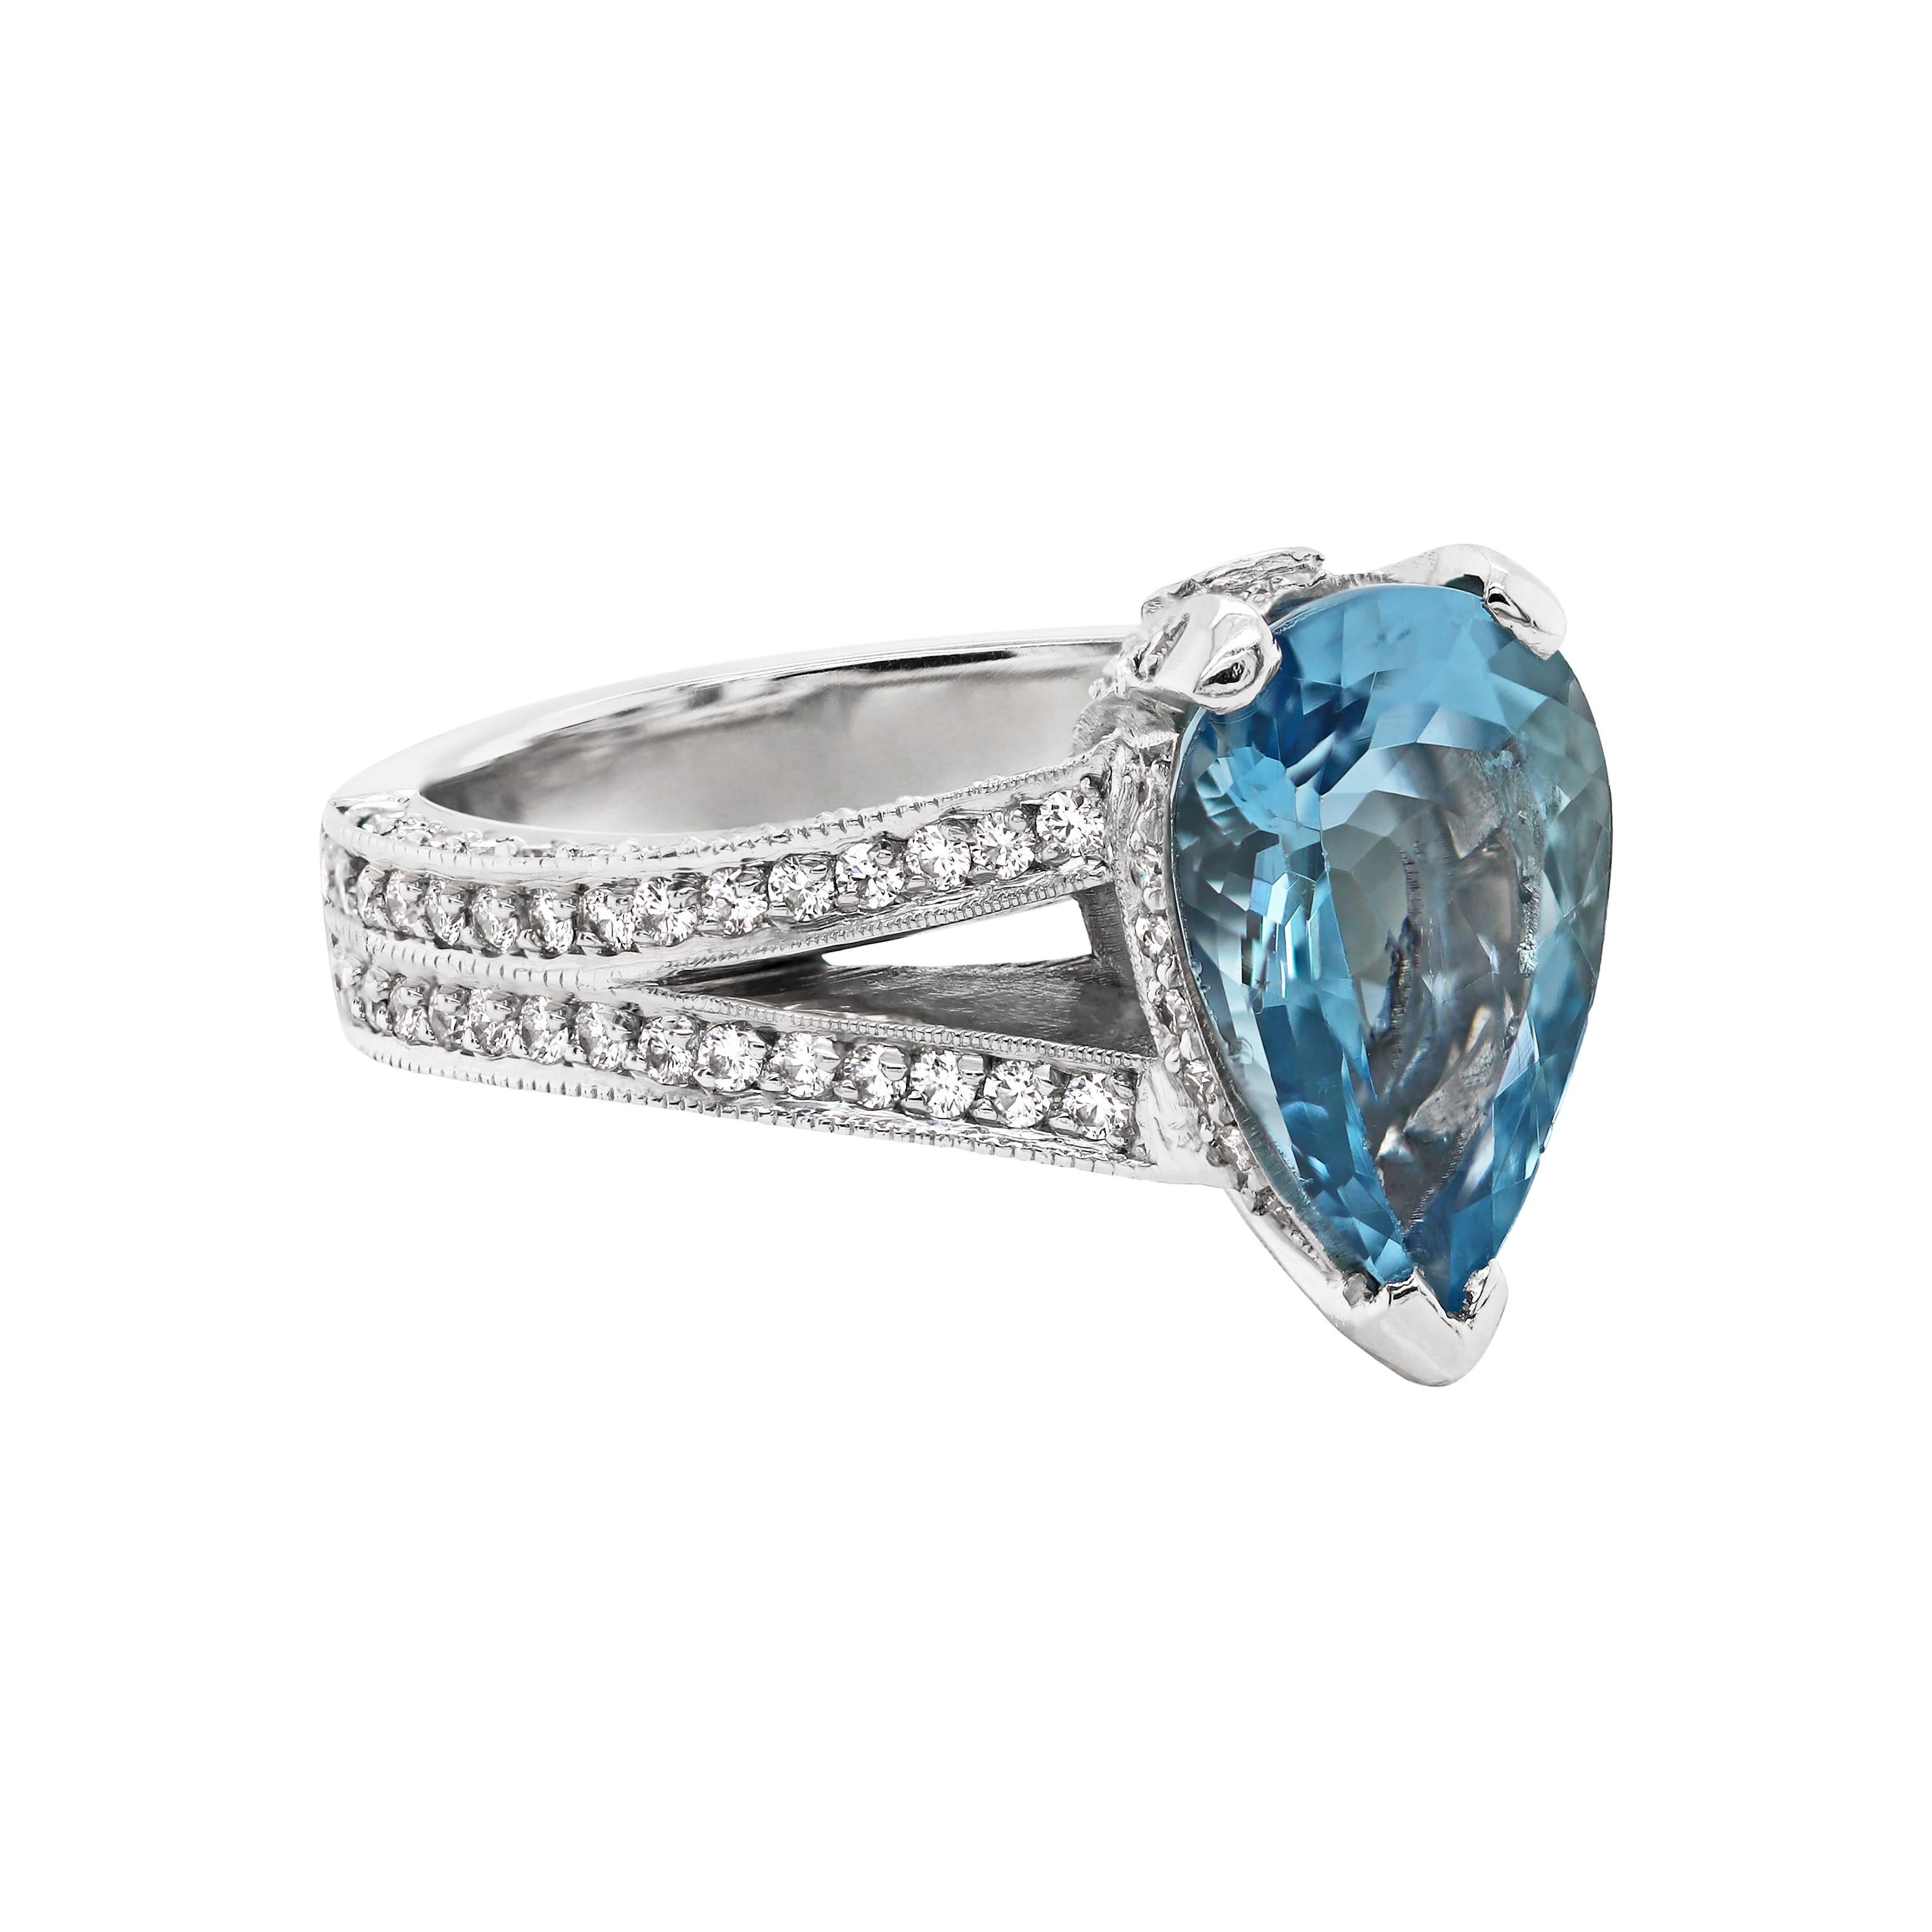 Exquisite platinum engagement ring featuring a beautiful 2.61 carat intense blue pear shaped aquamarine, mounted in a three claw, open back setting. This beautiful piece is elegantly embellished with round brilliant cut diamonds meticulously set on